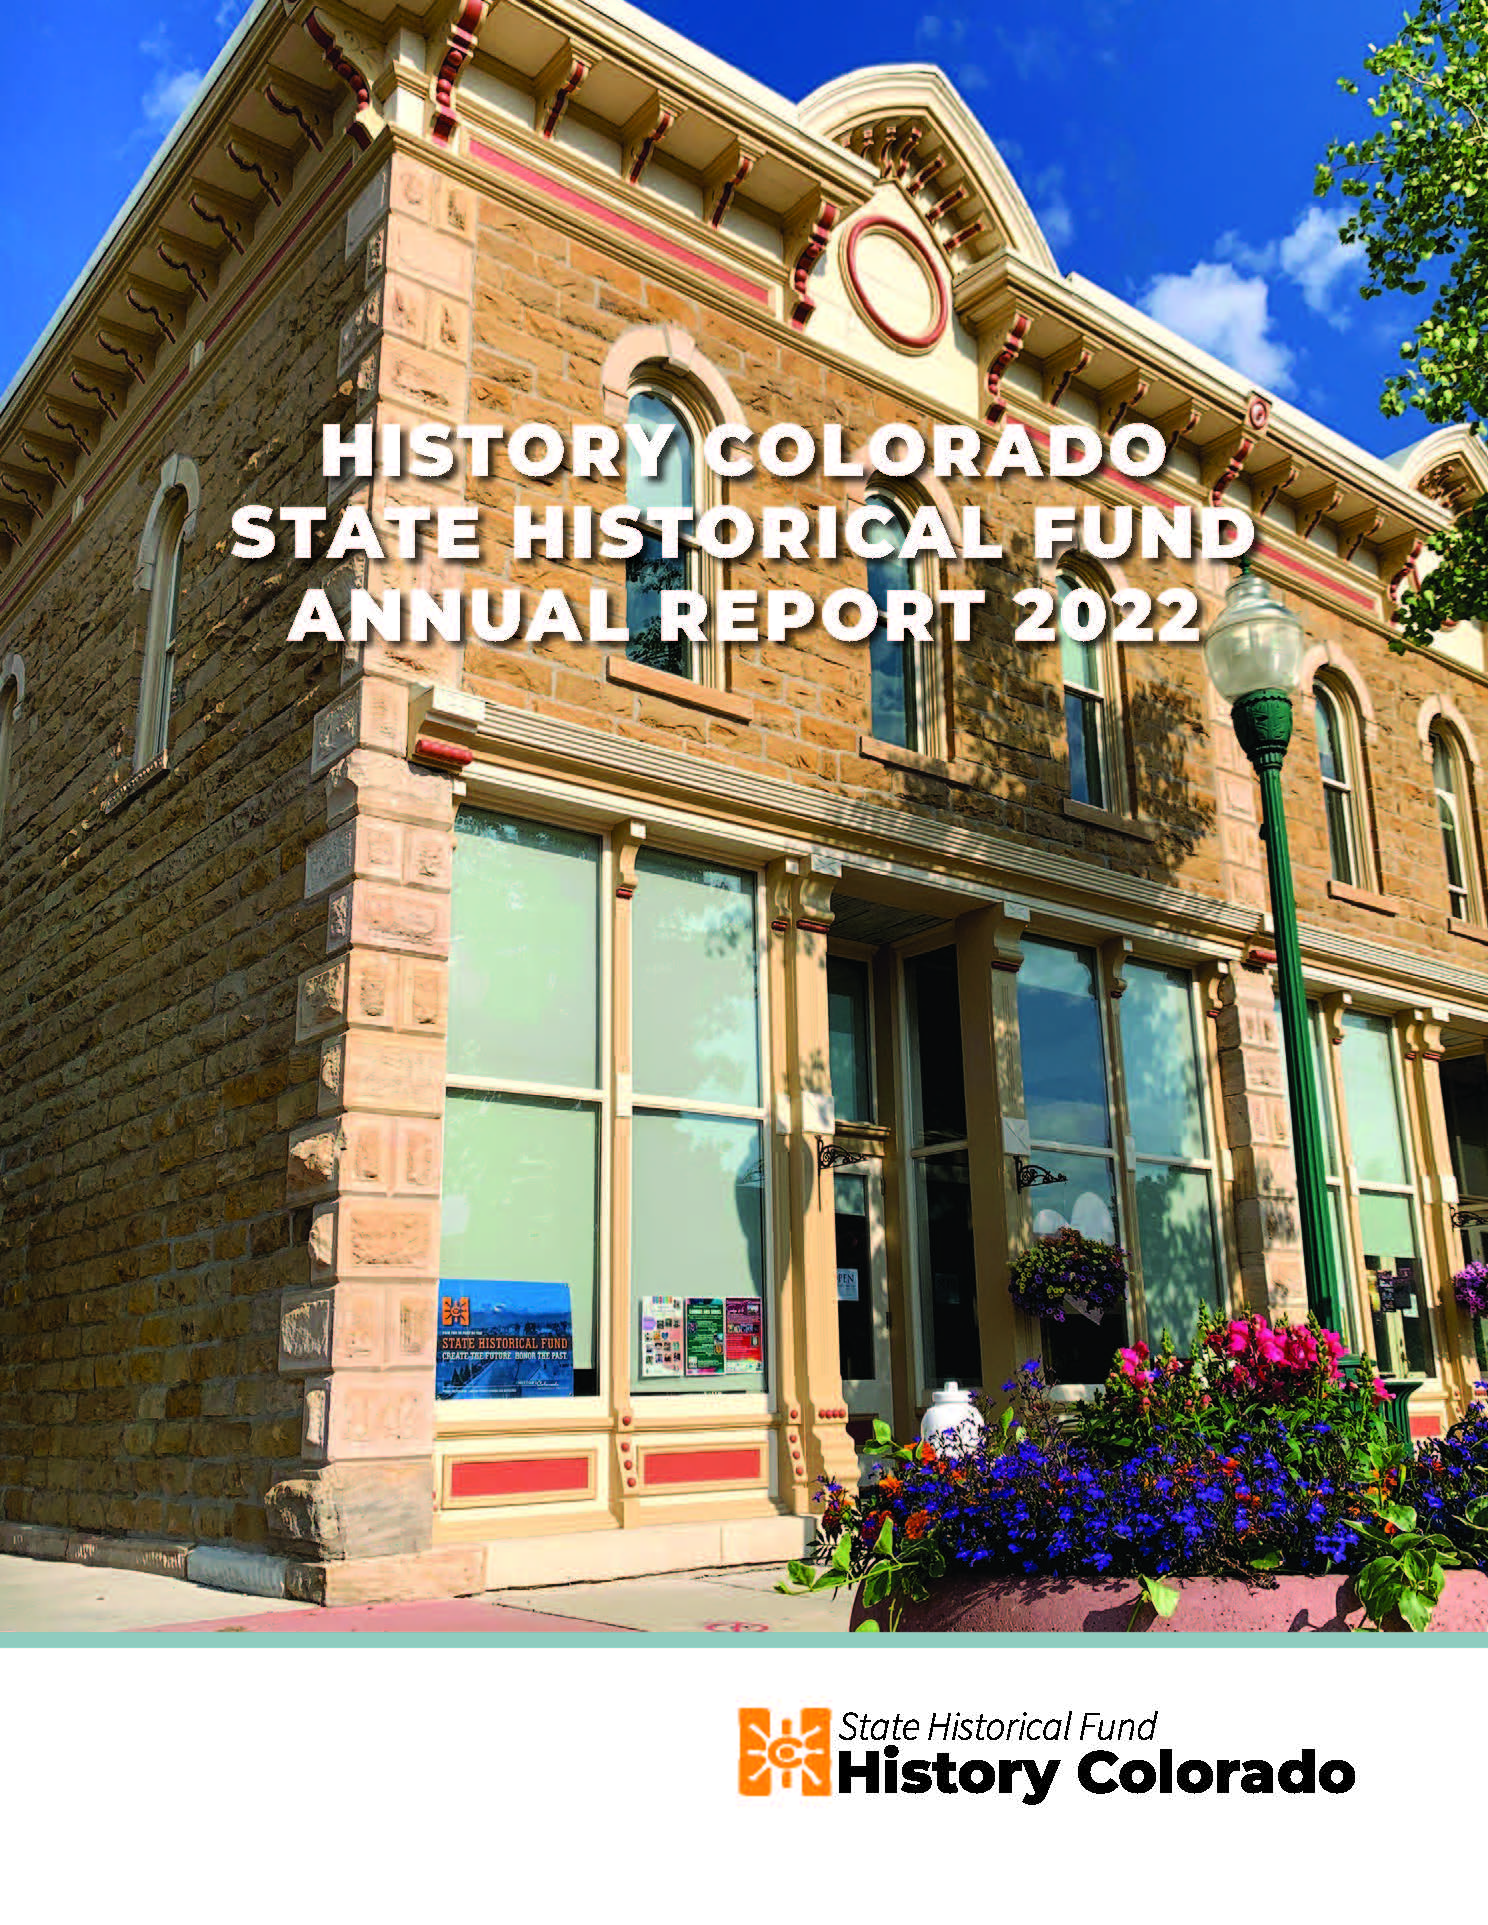 State Historical Fund Gaming Report 2022 Cover Image of the Gunnison Hardware Building in Gunnison County.